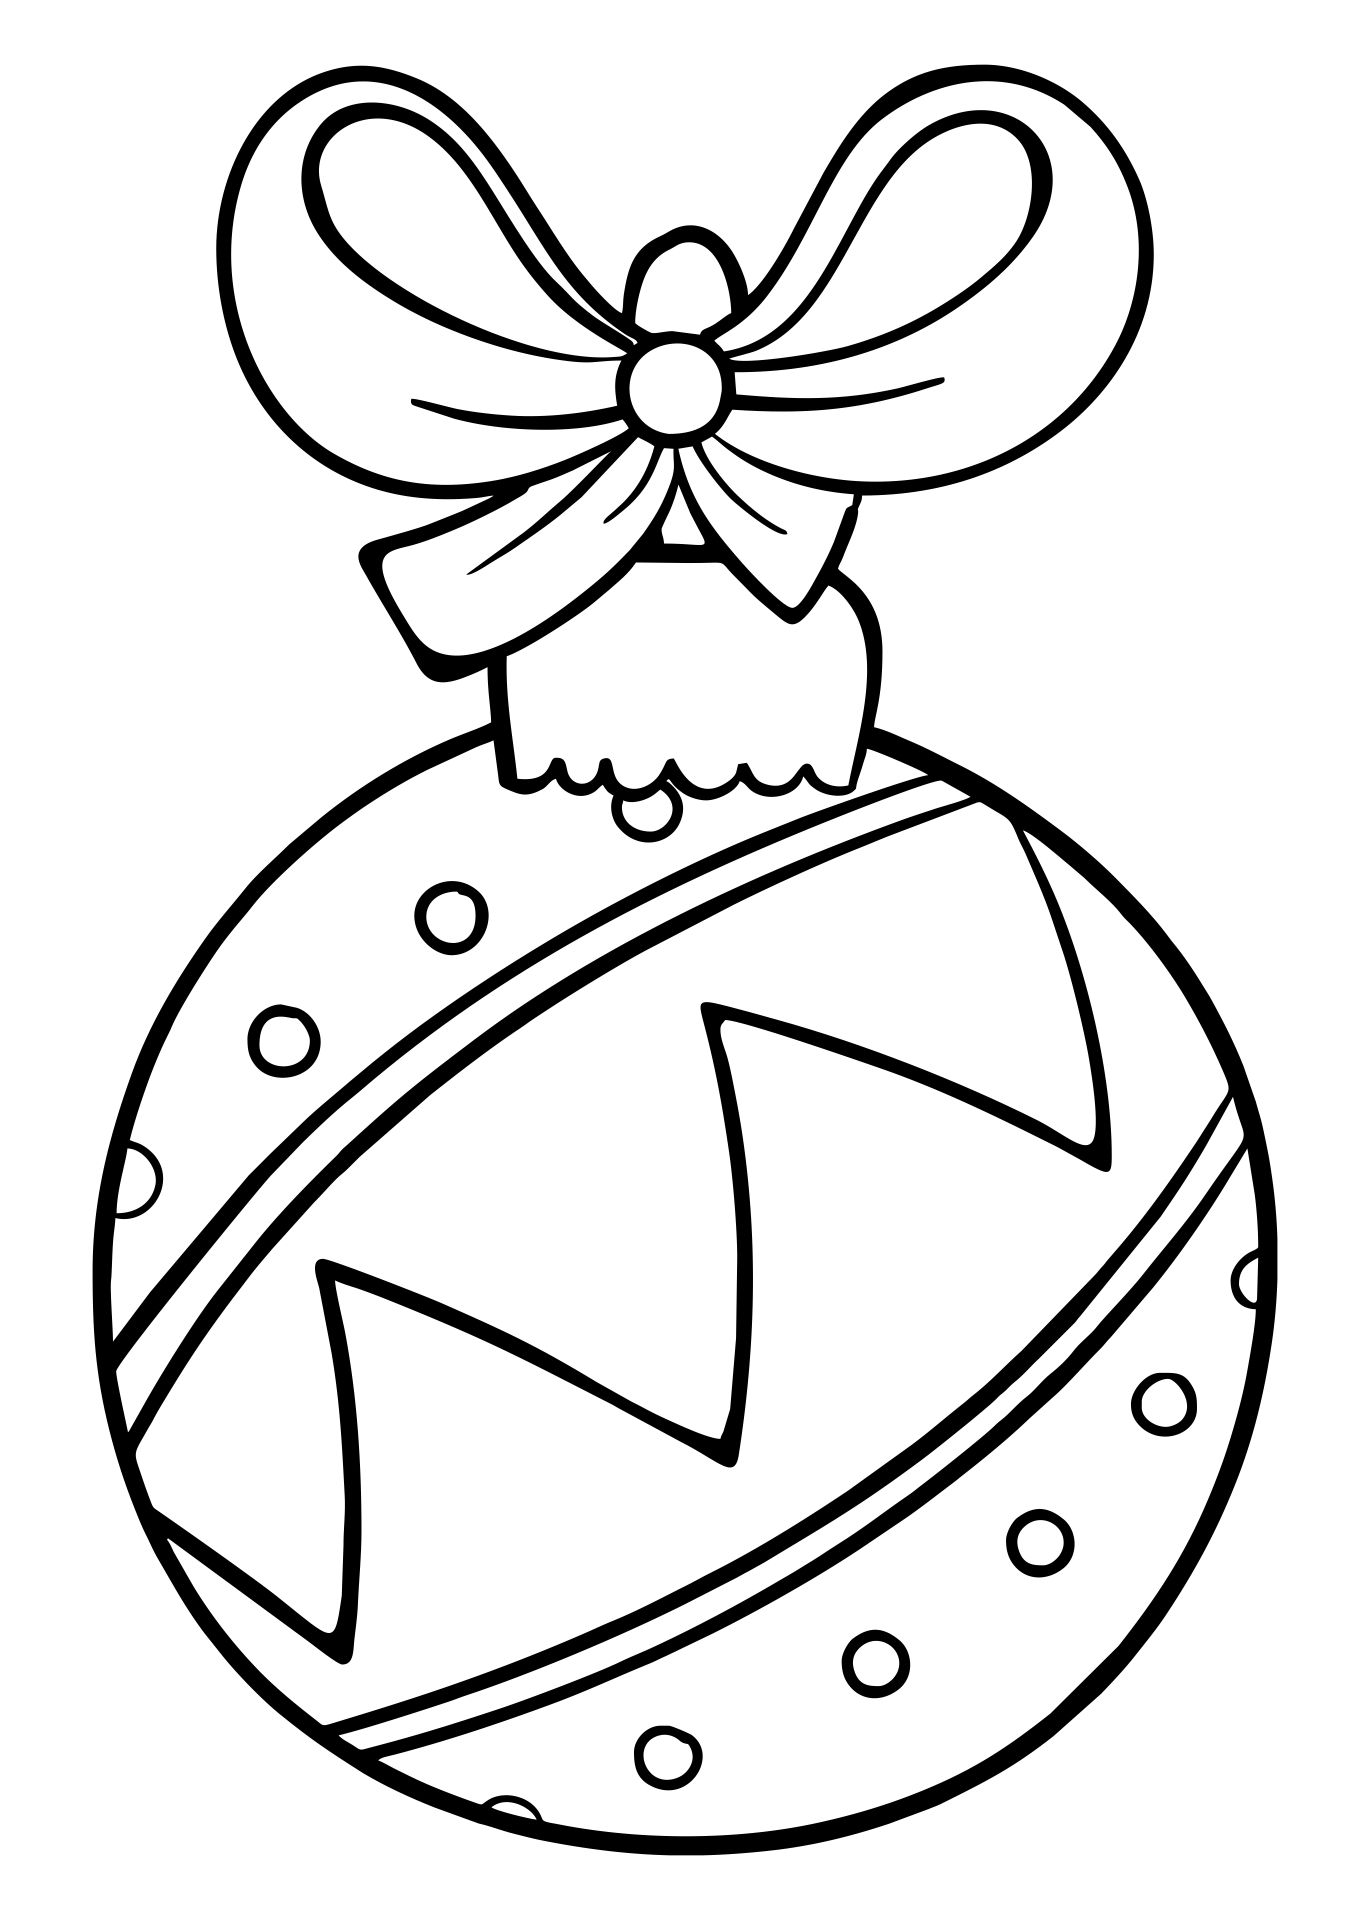 Printable Christmas Ornaments Coloring Pages & Blank Templates